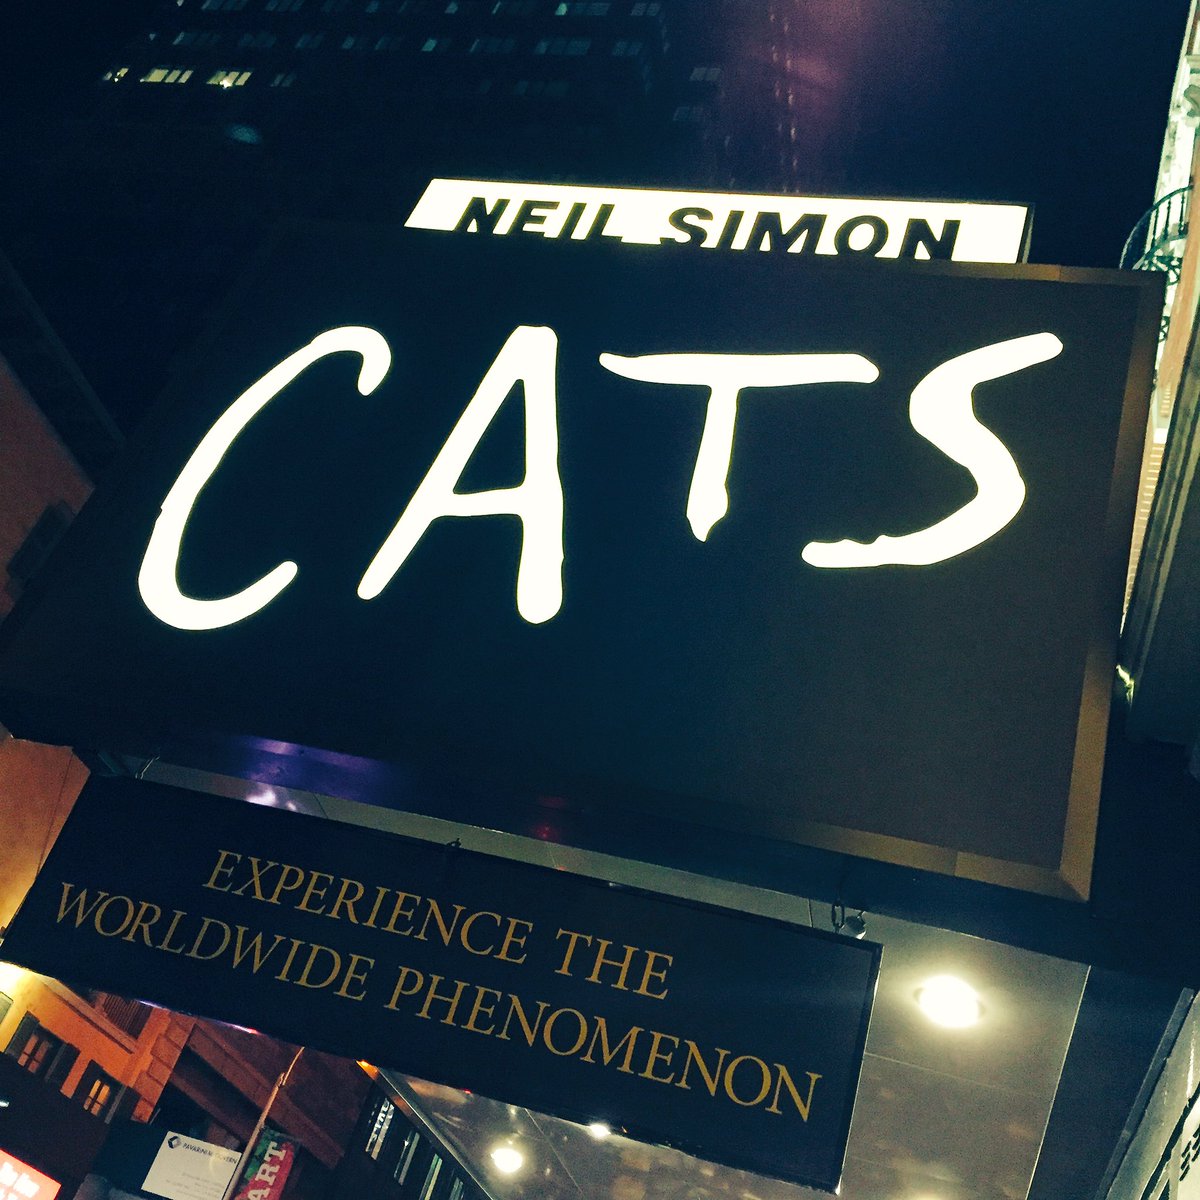 Crazy cat lady (me) finally got to experience @CatsBroadway ????????????????????????

It was AWESOME! https://t.co/k7dKug84aK